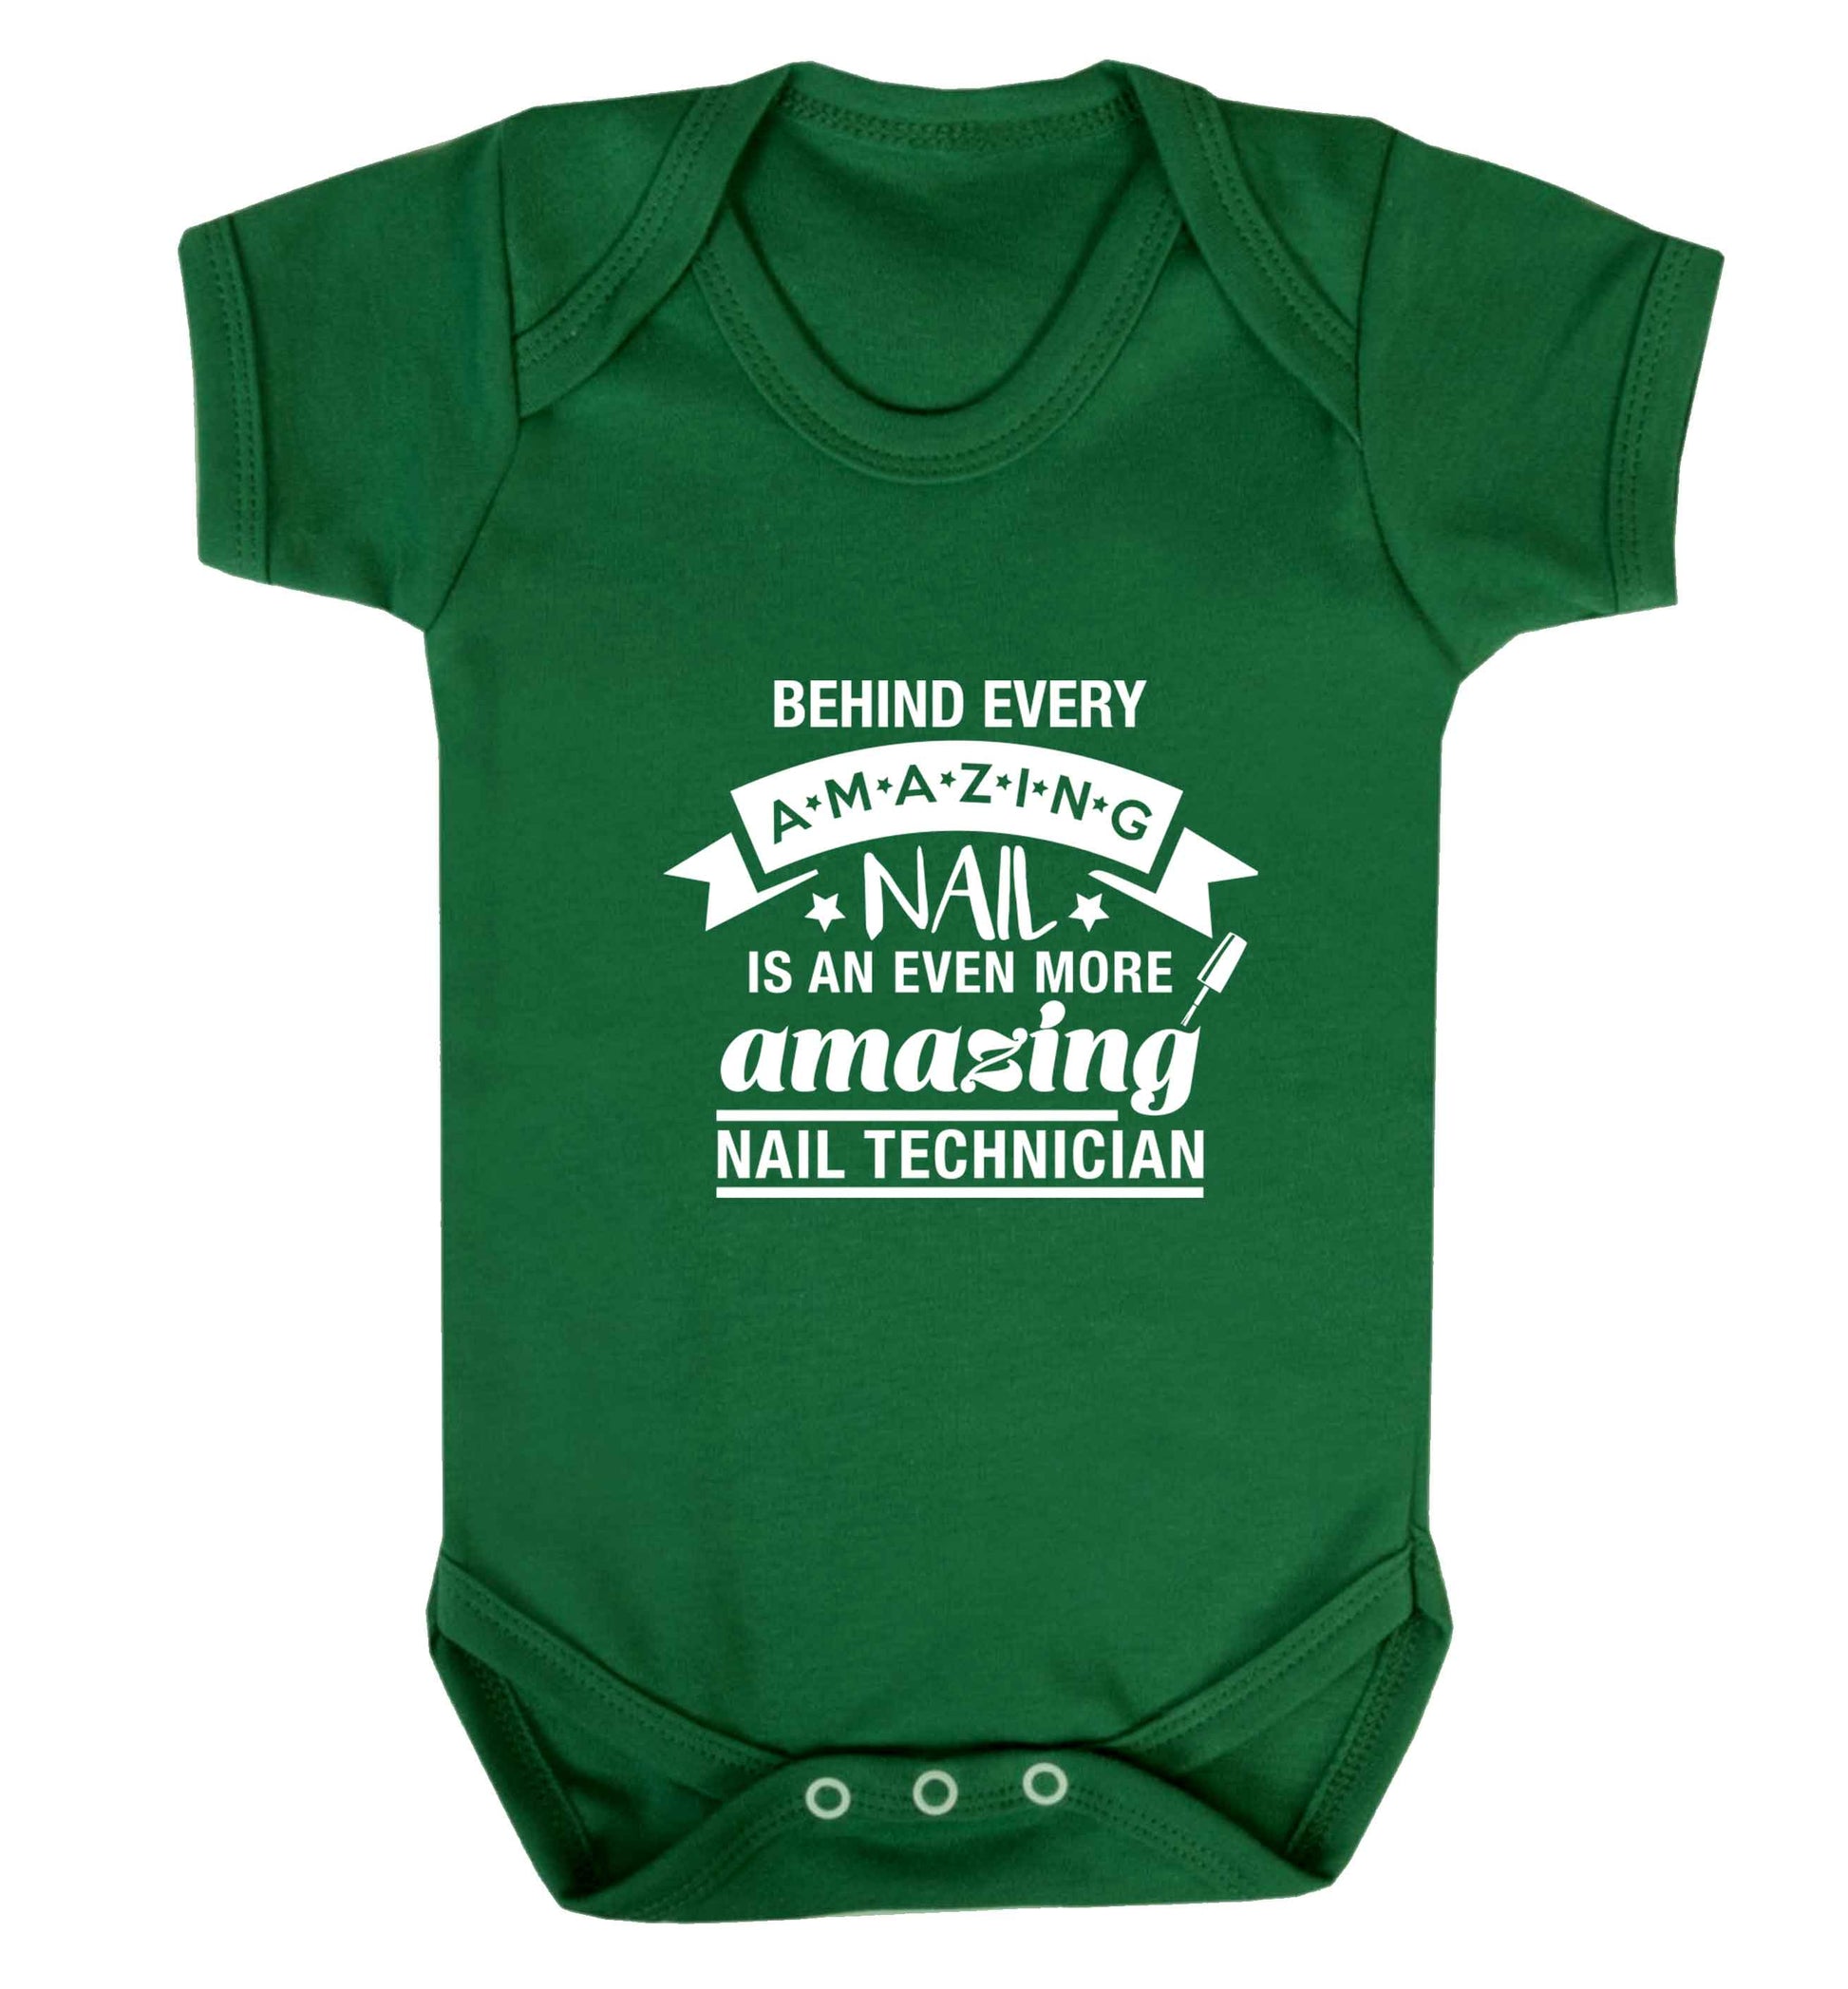 Behind every amazing nail is an even more amazing nail technician baby vest green 18-24 months